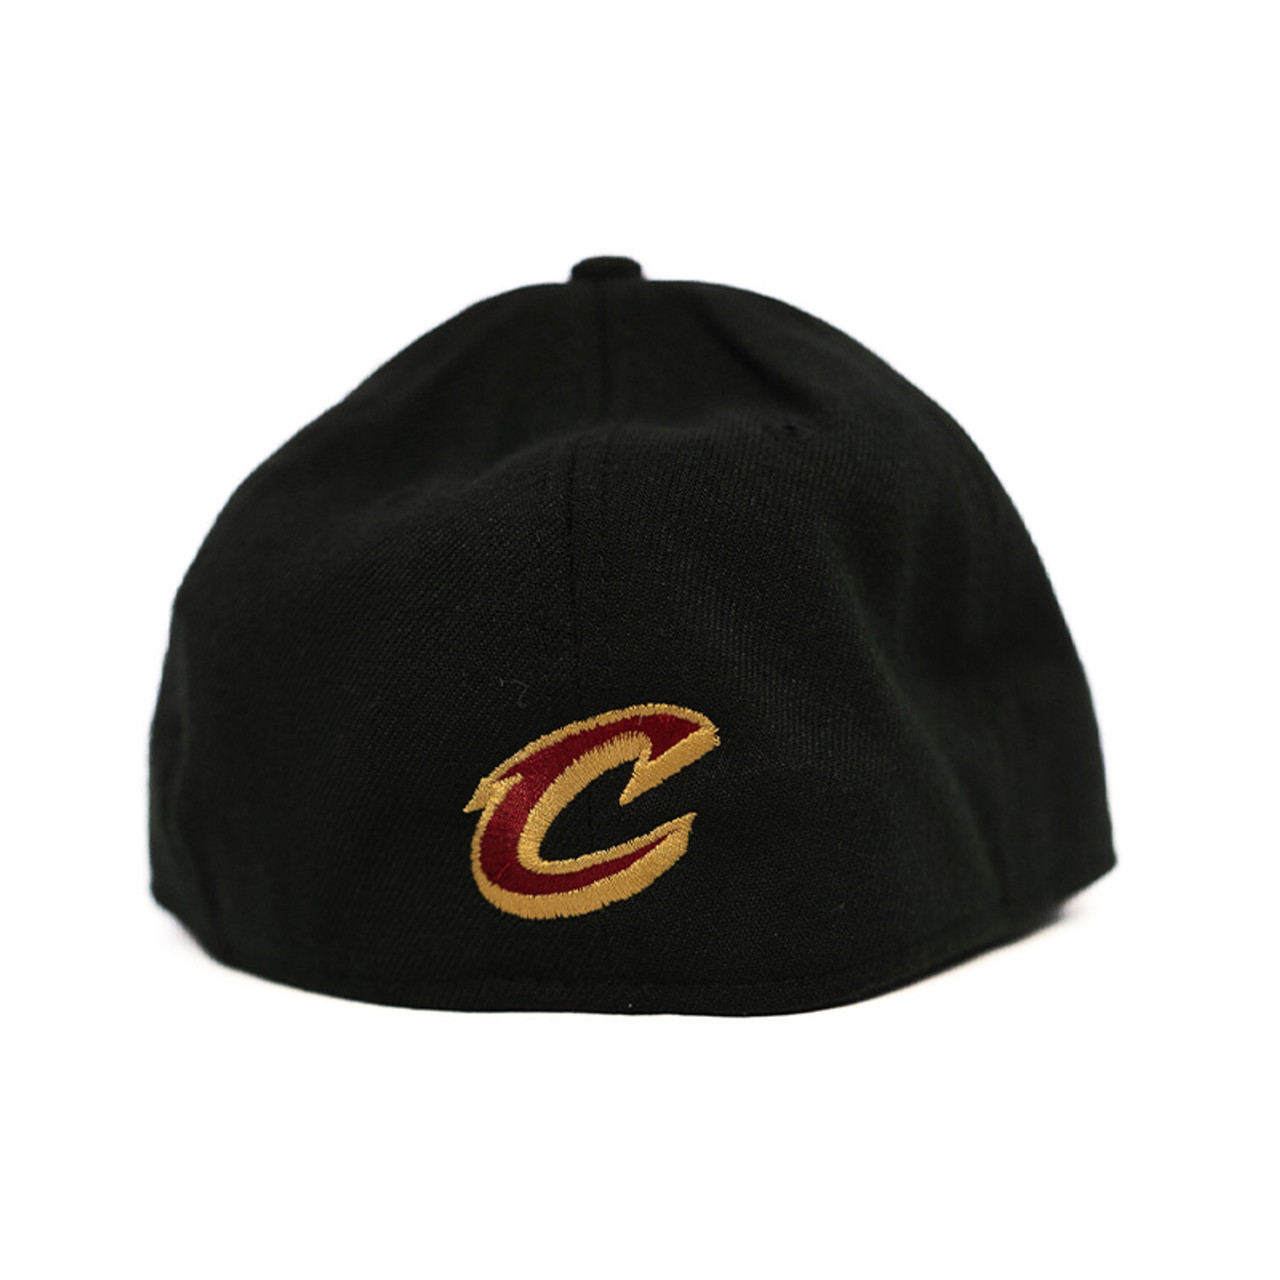 New Era V Net Black and Gold Fitted Hat Size 7 3/4 | Cavaliers